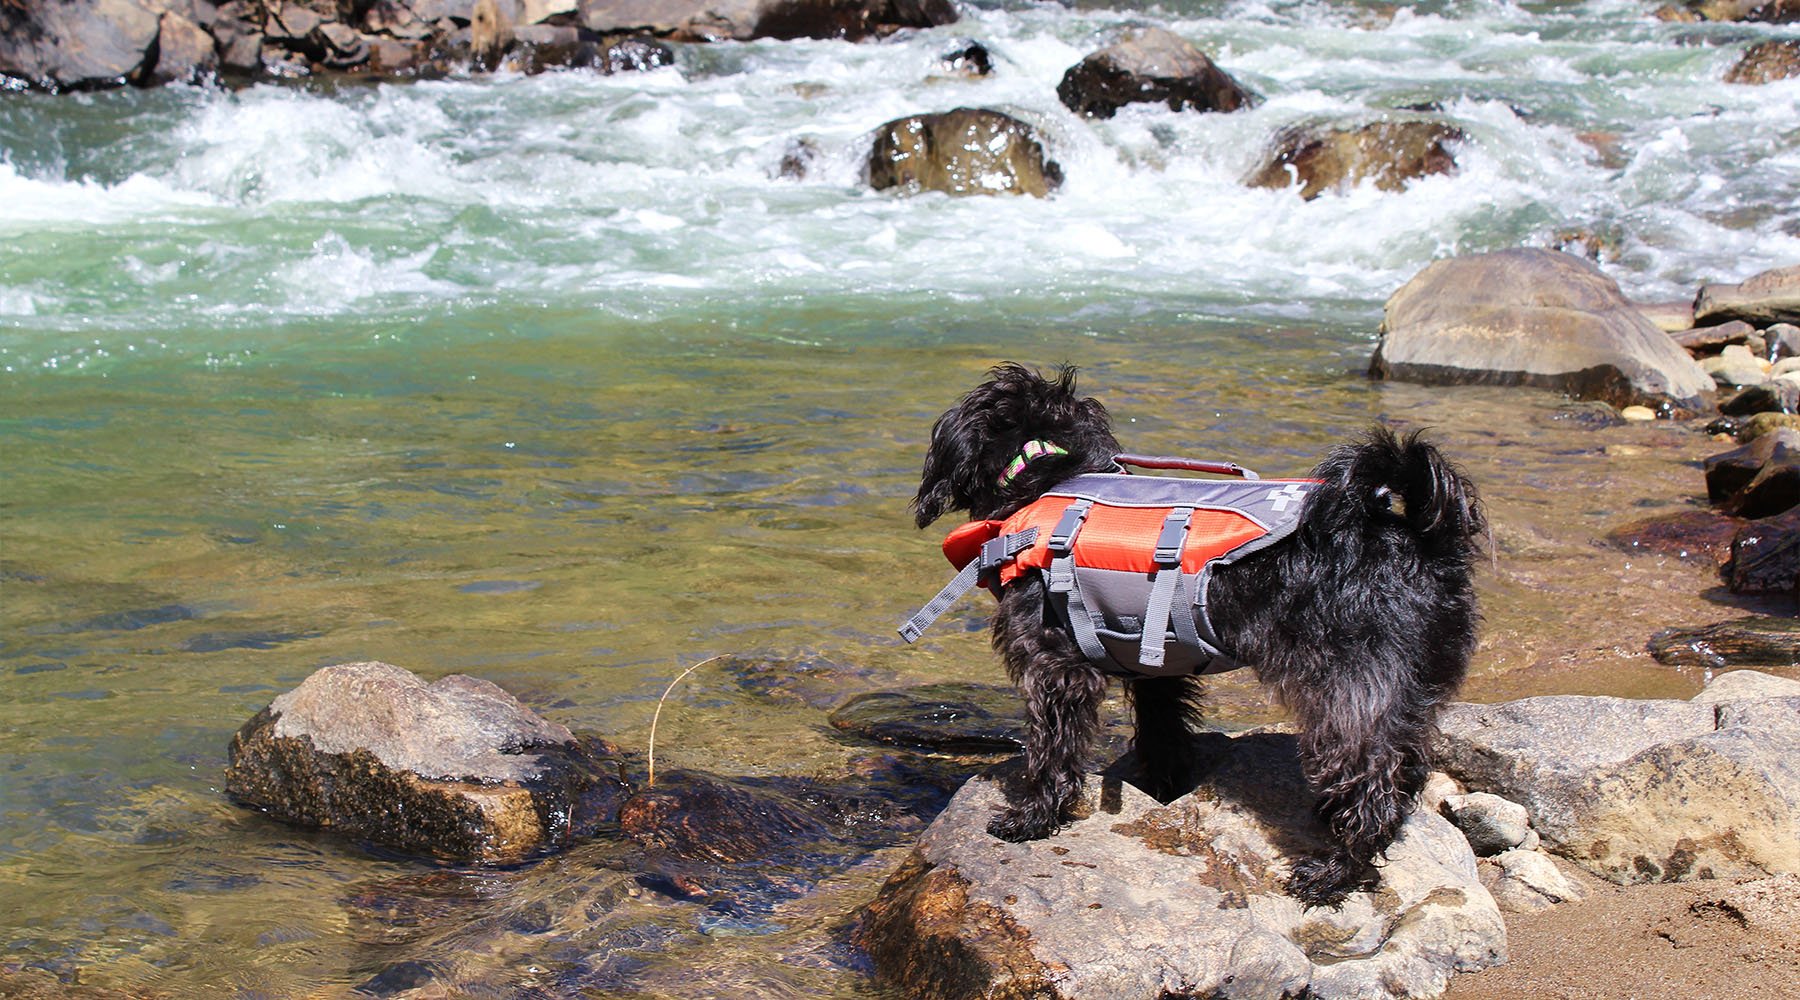 Small dog in life jacket at the edge of a river